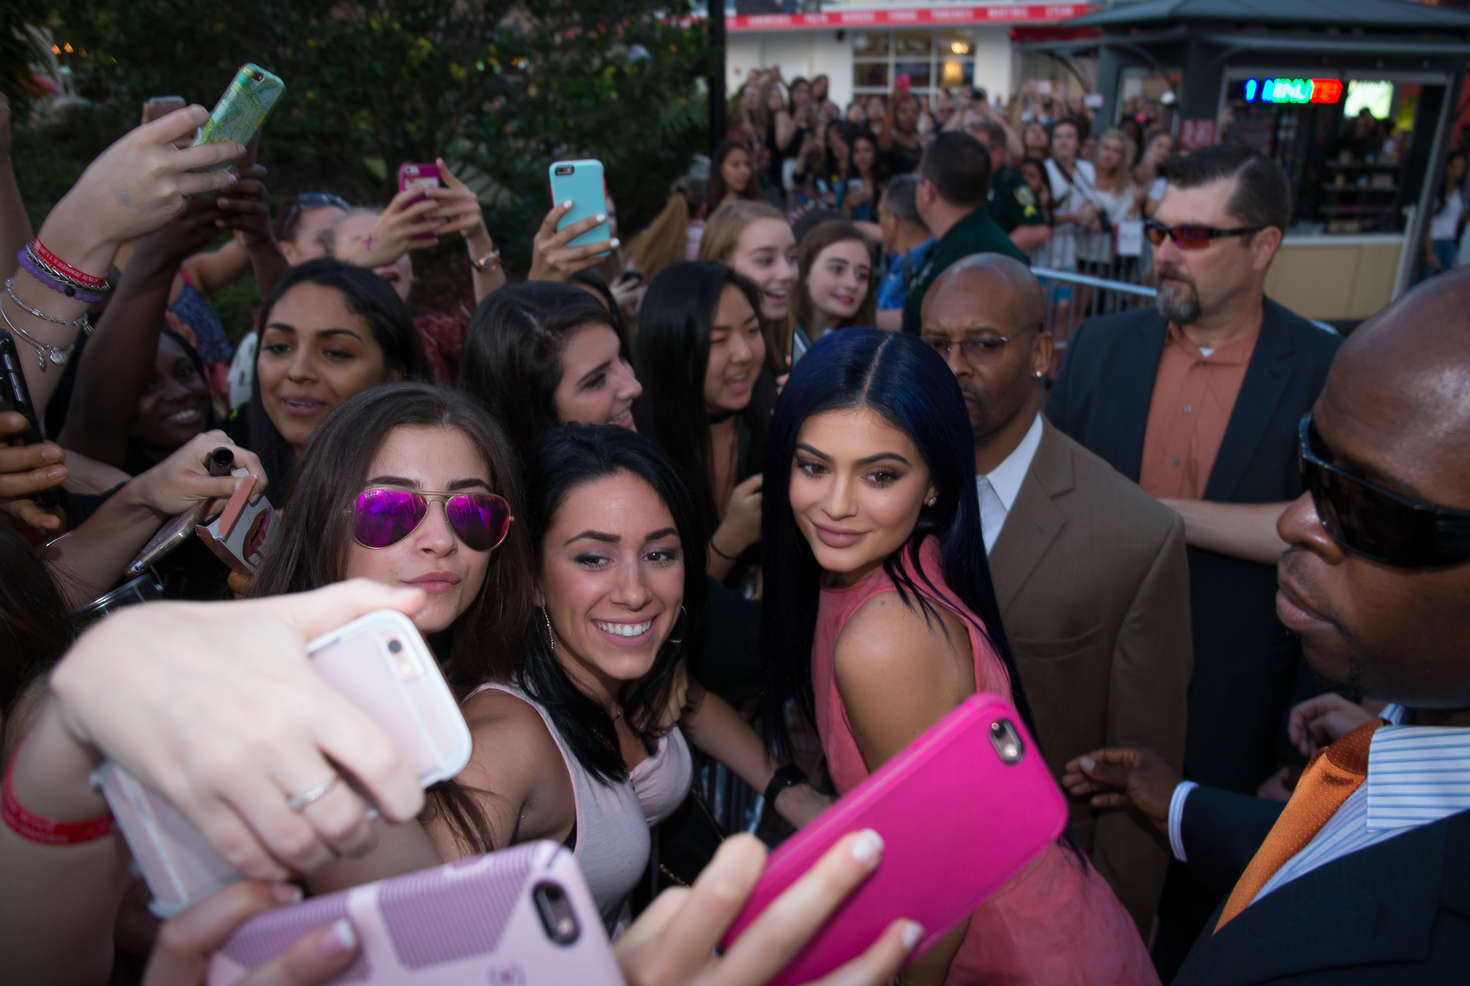 Kylie Jenner â€“ Opening of The Sugar Factory in Orlando